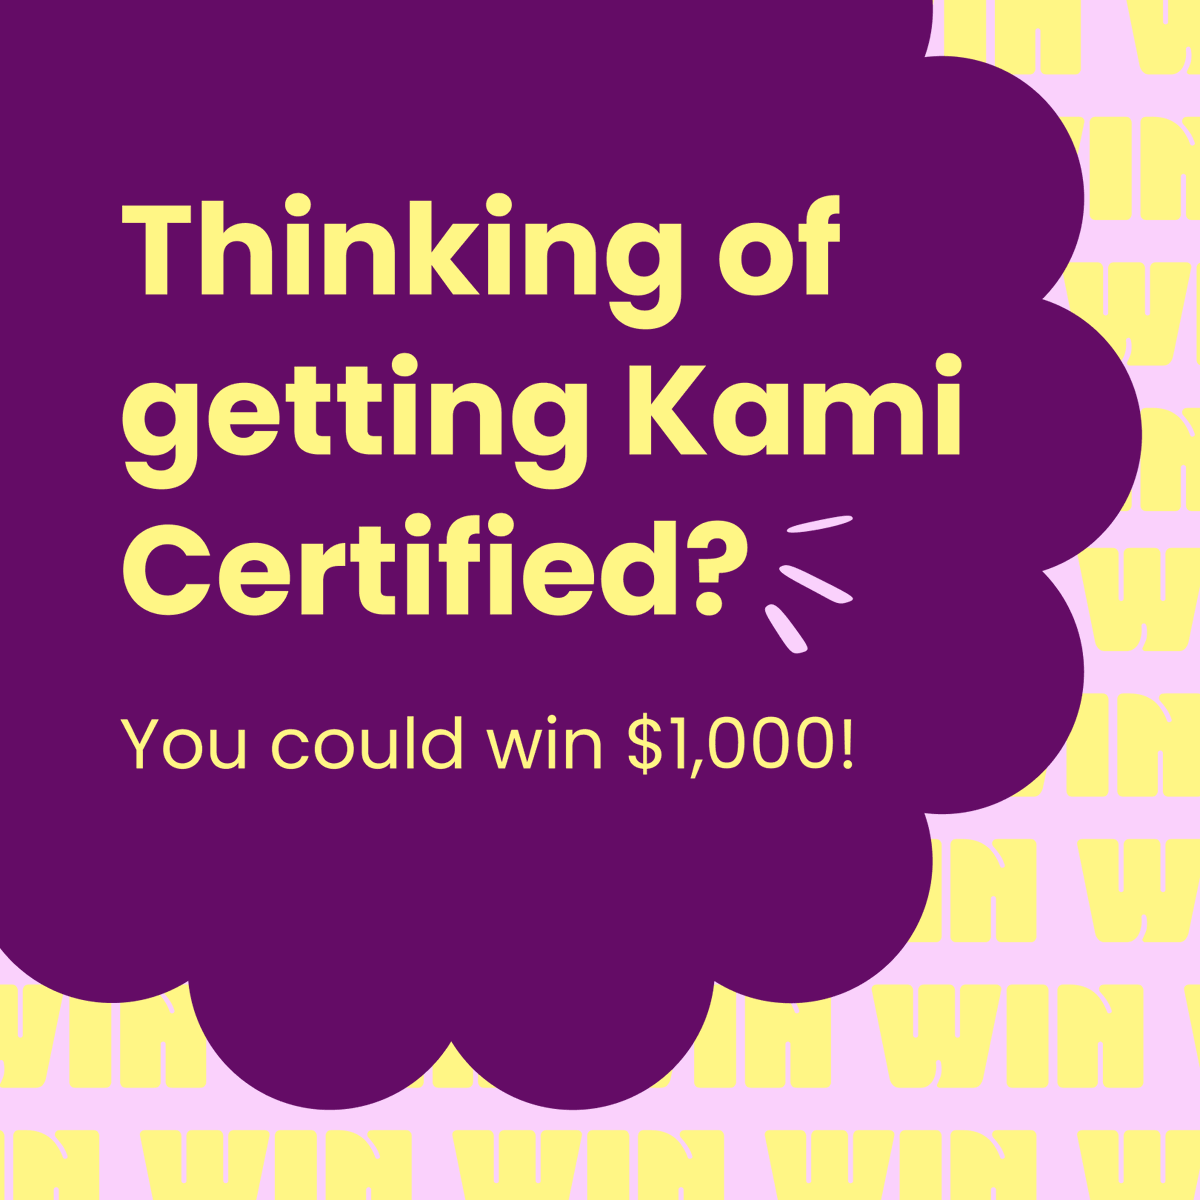 The first 1,000 people to complete Kami’s new and improved Level 1 Certified course will be in to win a $1,000 classroom shopping spree! Plus, get a bonus entry for completing Level 2 🏆 Get Certified ➡️ kamiapp.com/certified